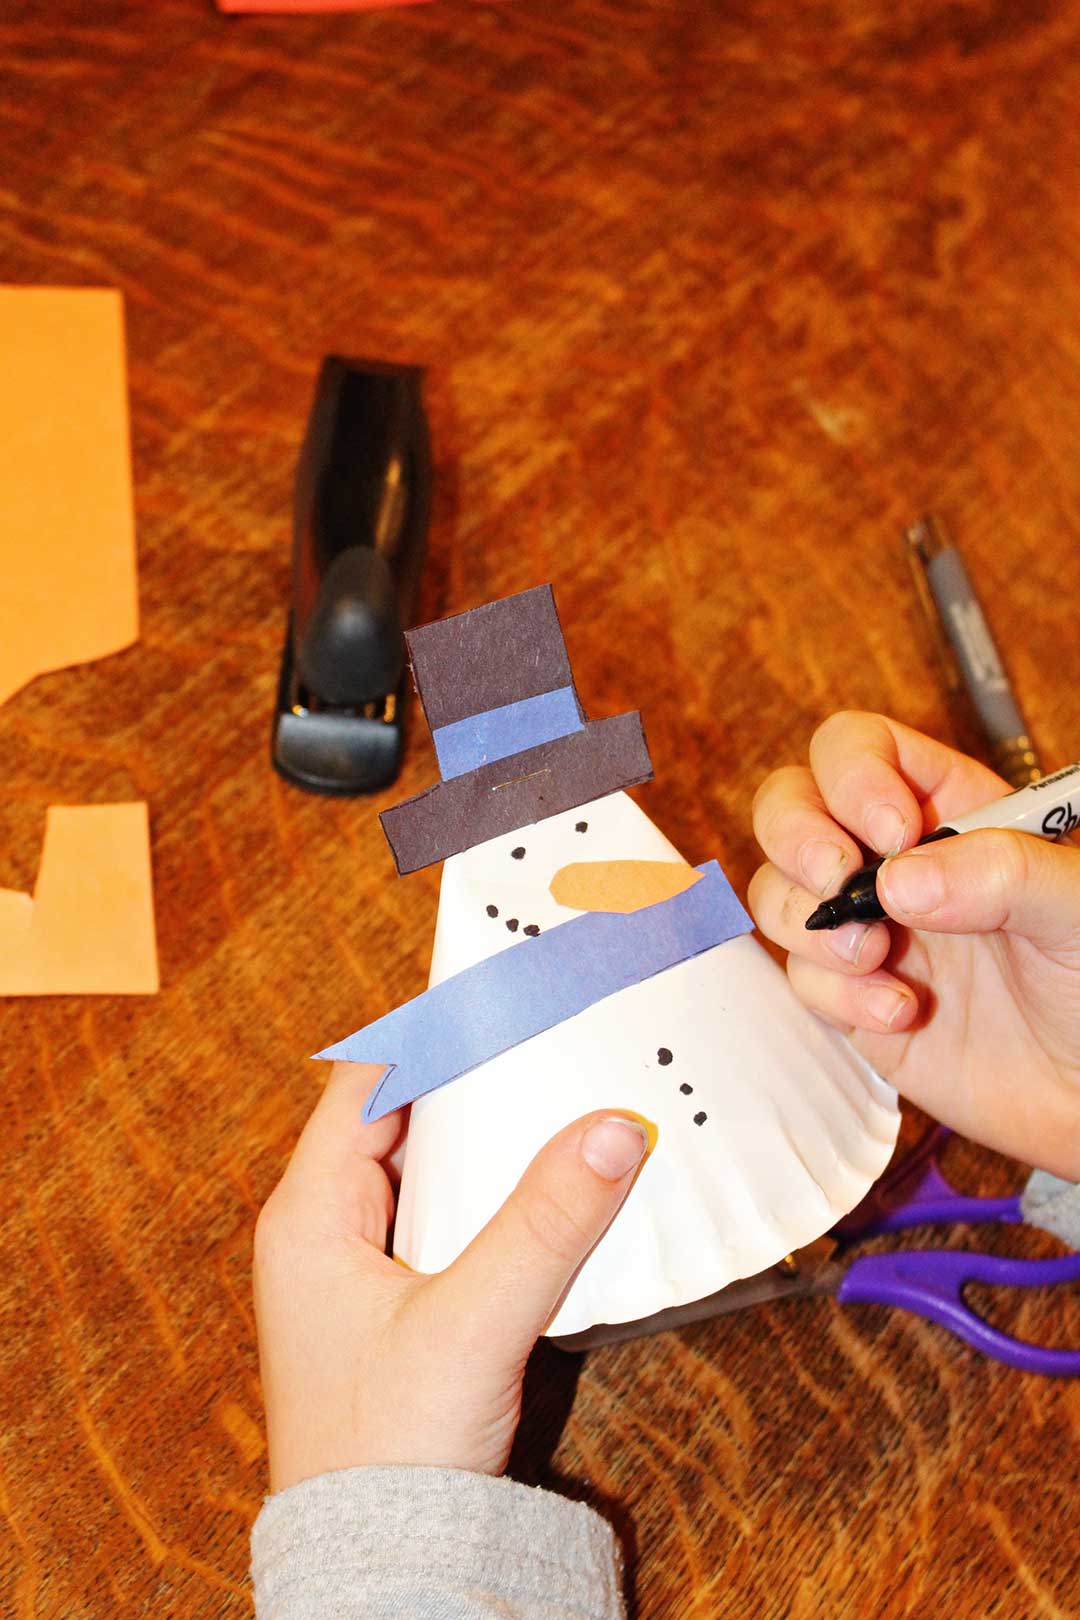 Person drawing black buttons on 3-D paper plate snowman with a Sharpie marker with various supplies near them on a wooden table.